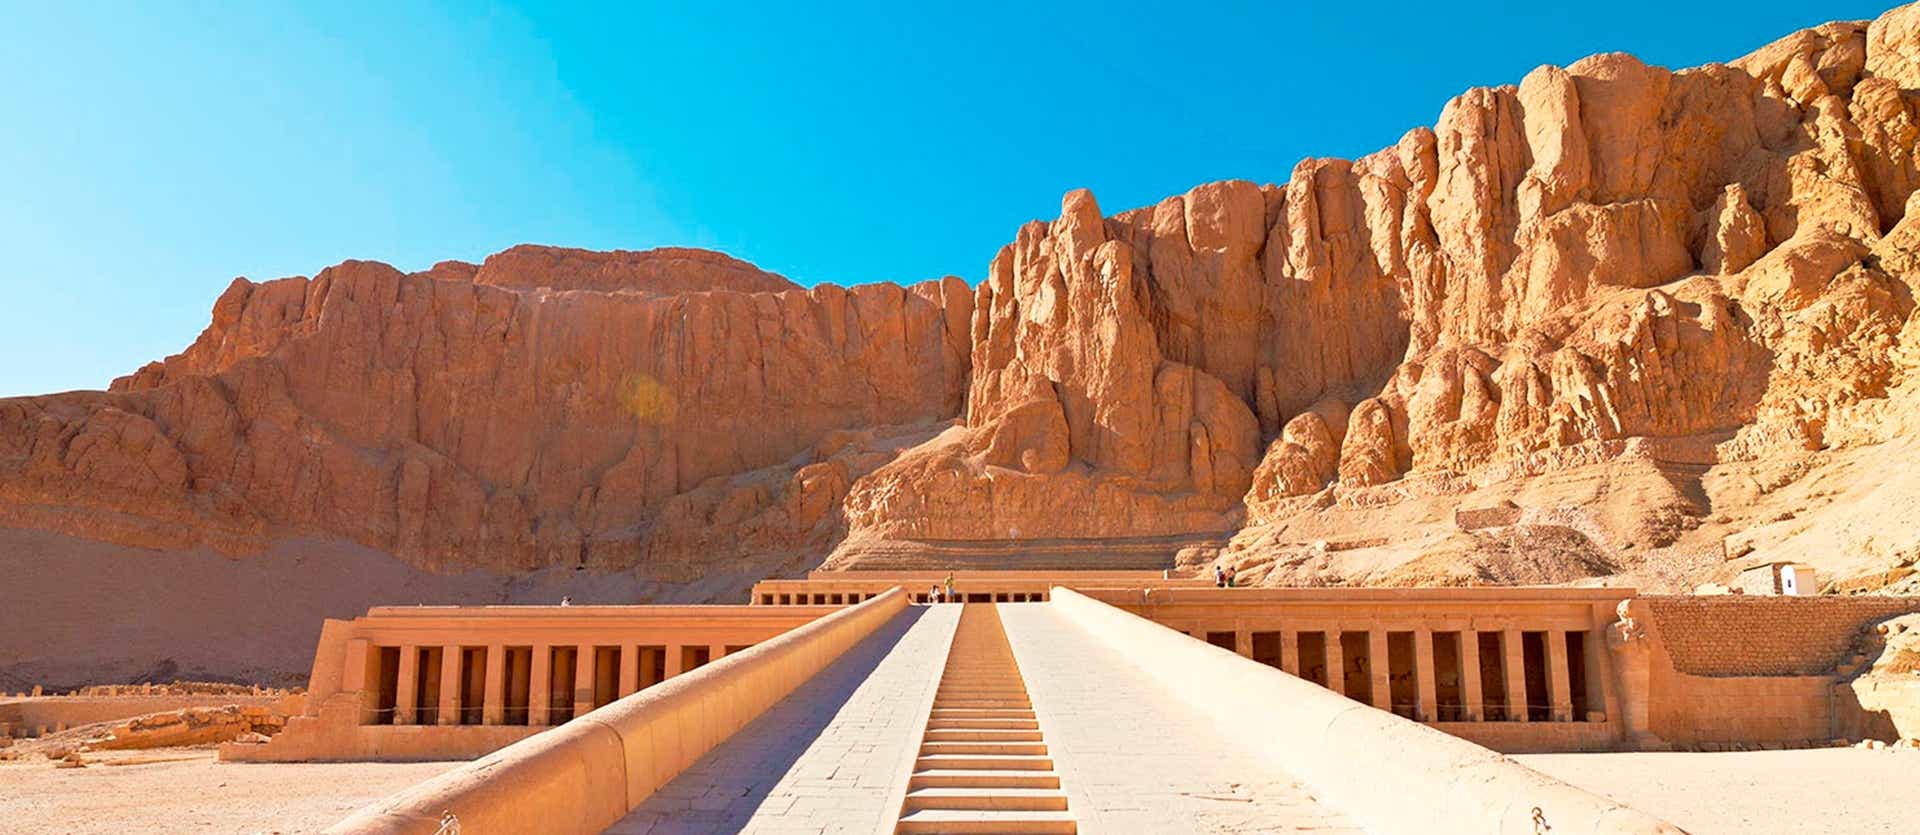 Temple of Queen Hatshepsut <span class="iconos separador"></span> Luxor <span class="iconos separador"></span> Egypt